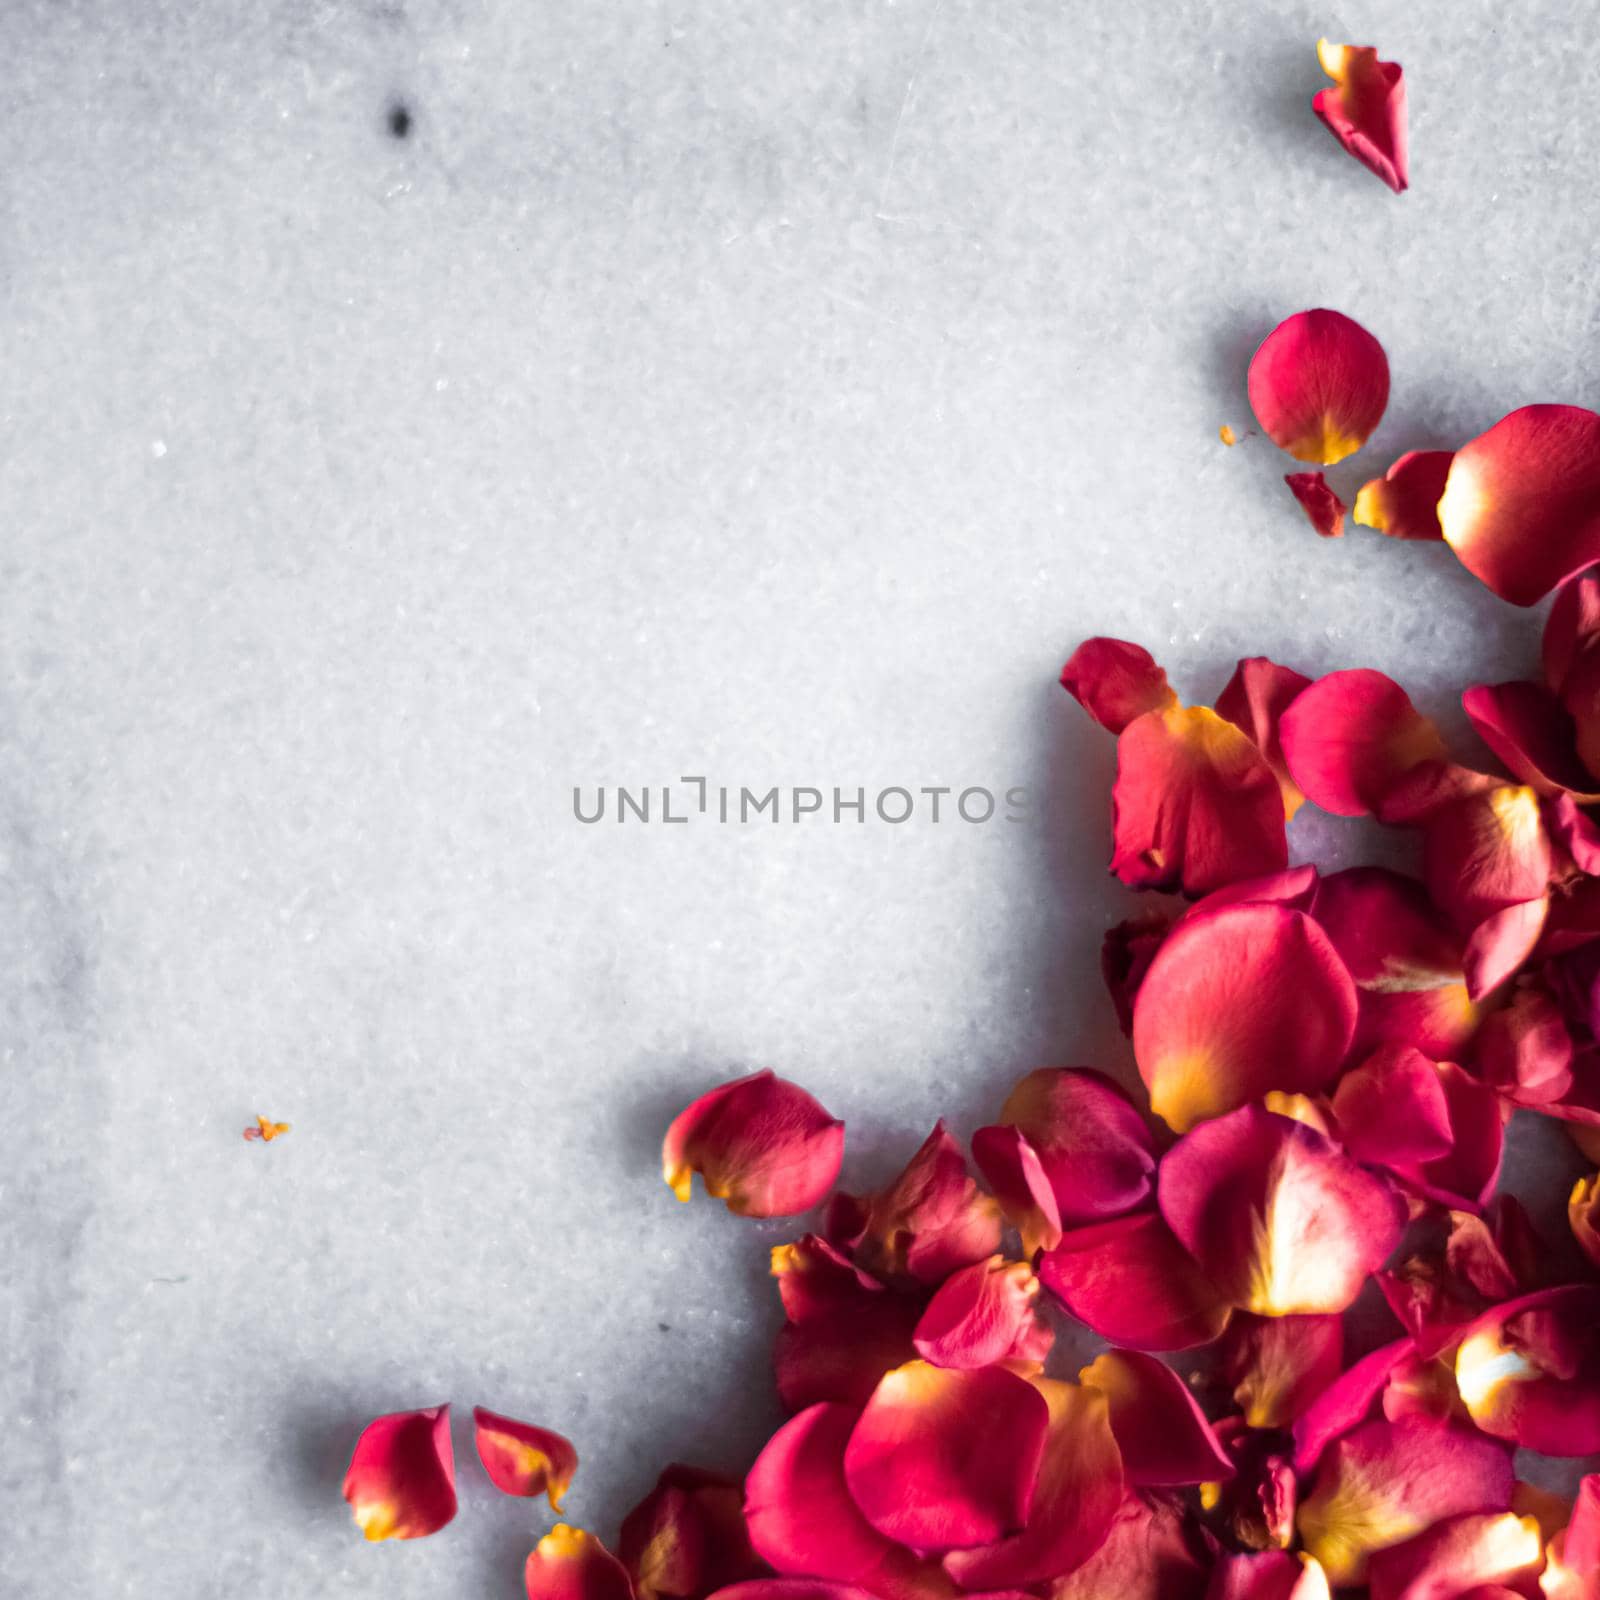 Rose petals on marble background, floral decor and wedding flatlay, holiday greeting card backdrop for event invitation, flat lay design.